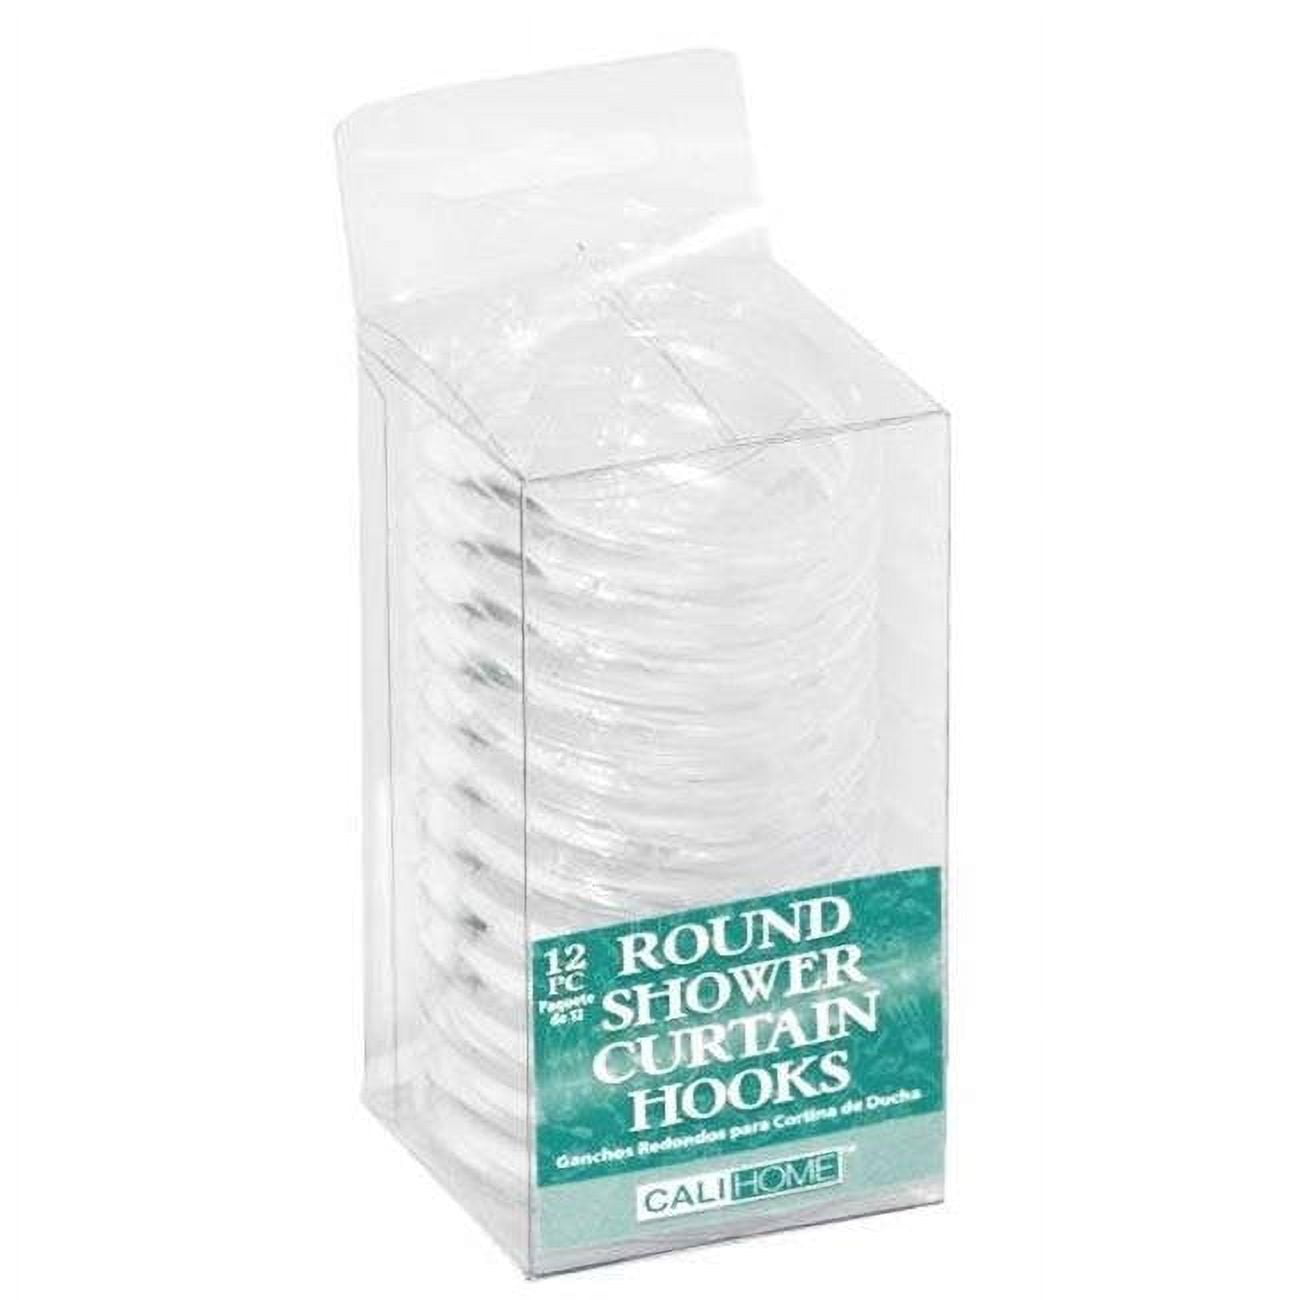 Picture of DDI 2329902 Round Shower Curtain Hooks - 12 Count Case of 72